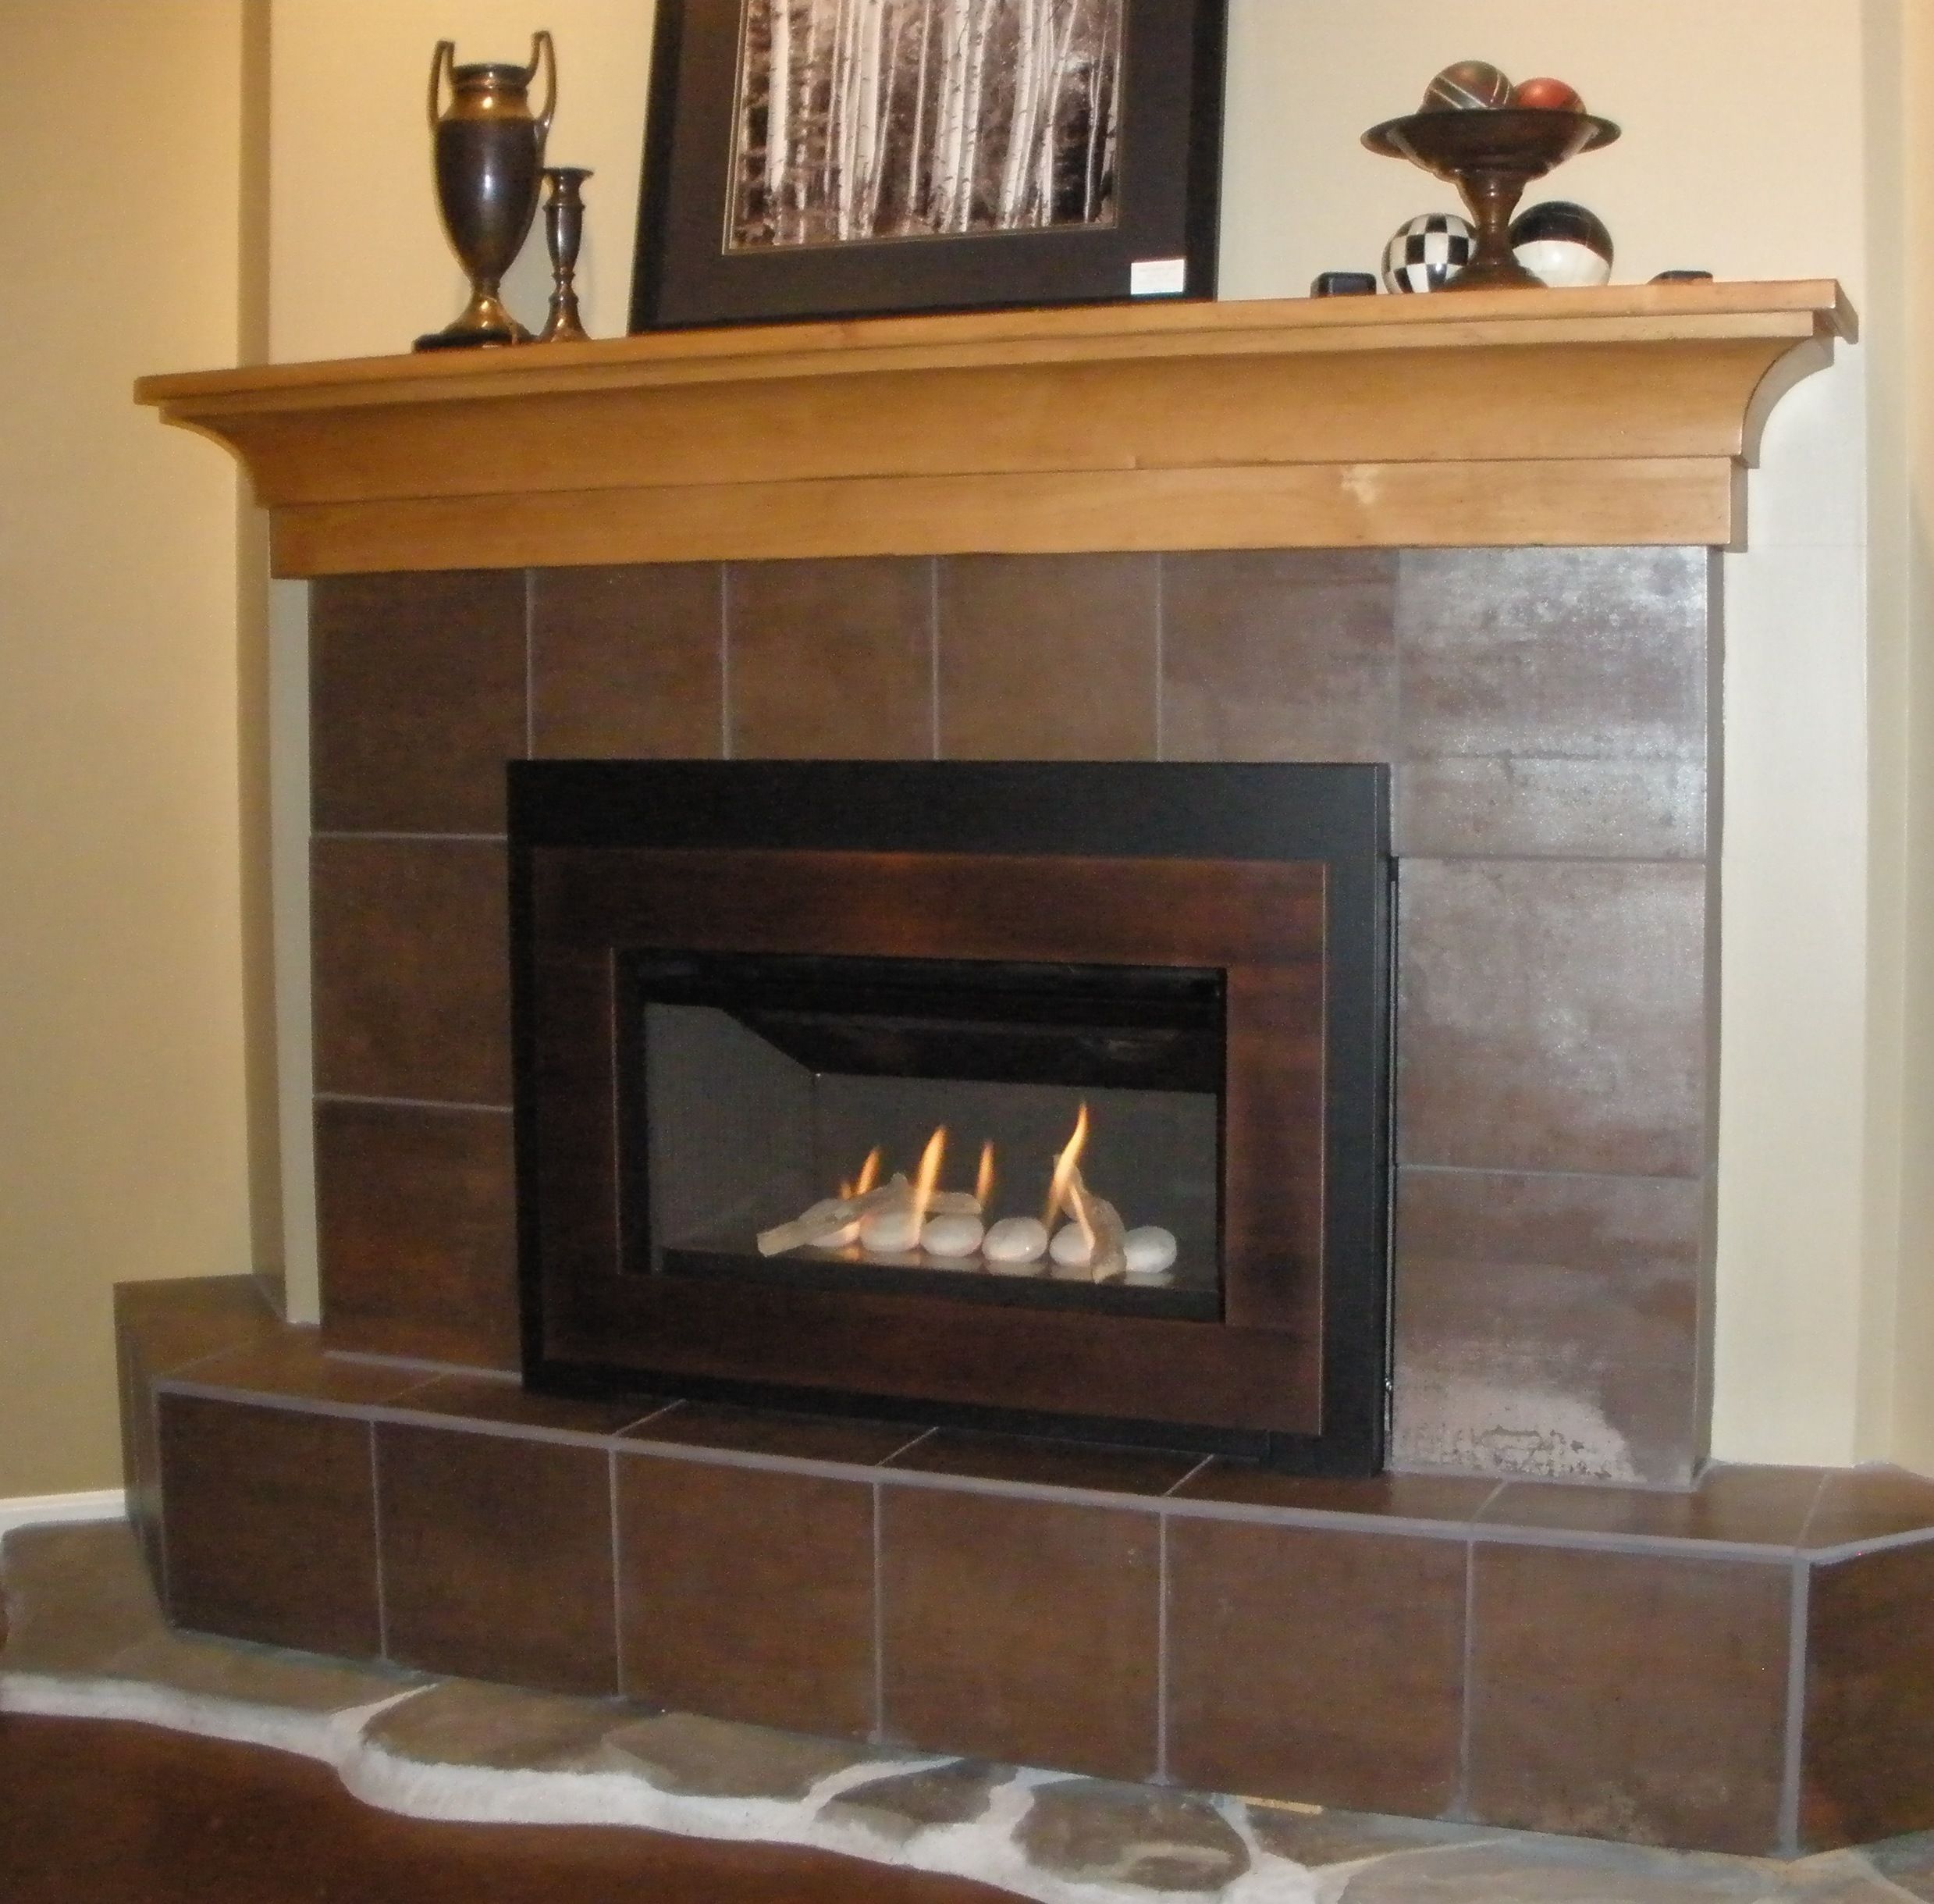 Pleasant Hearth Gas Fireplace Best Of Pin On Valor Radiant Gas Fireplaces Midwest Dealer